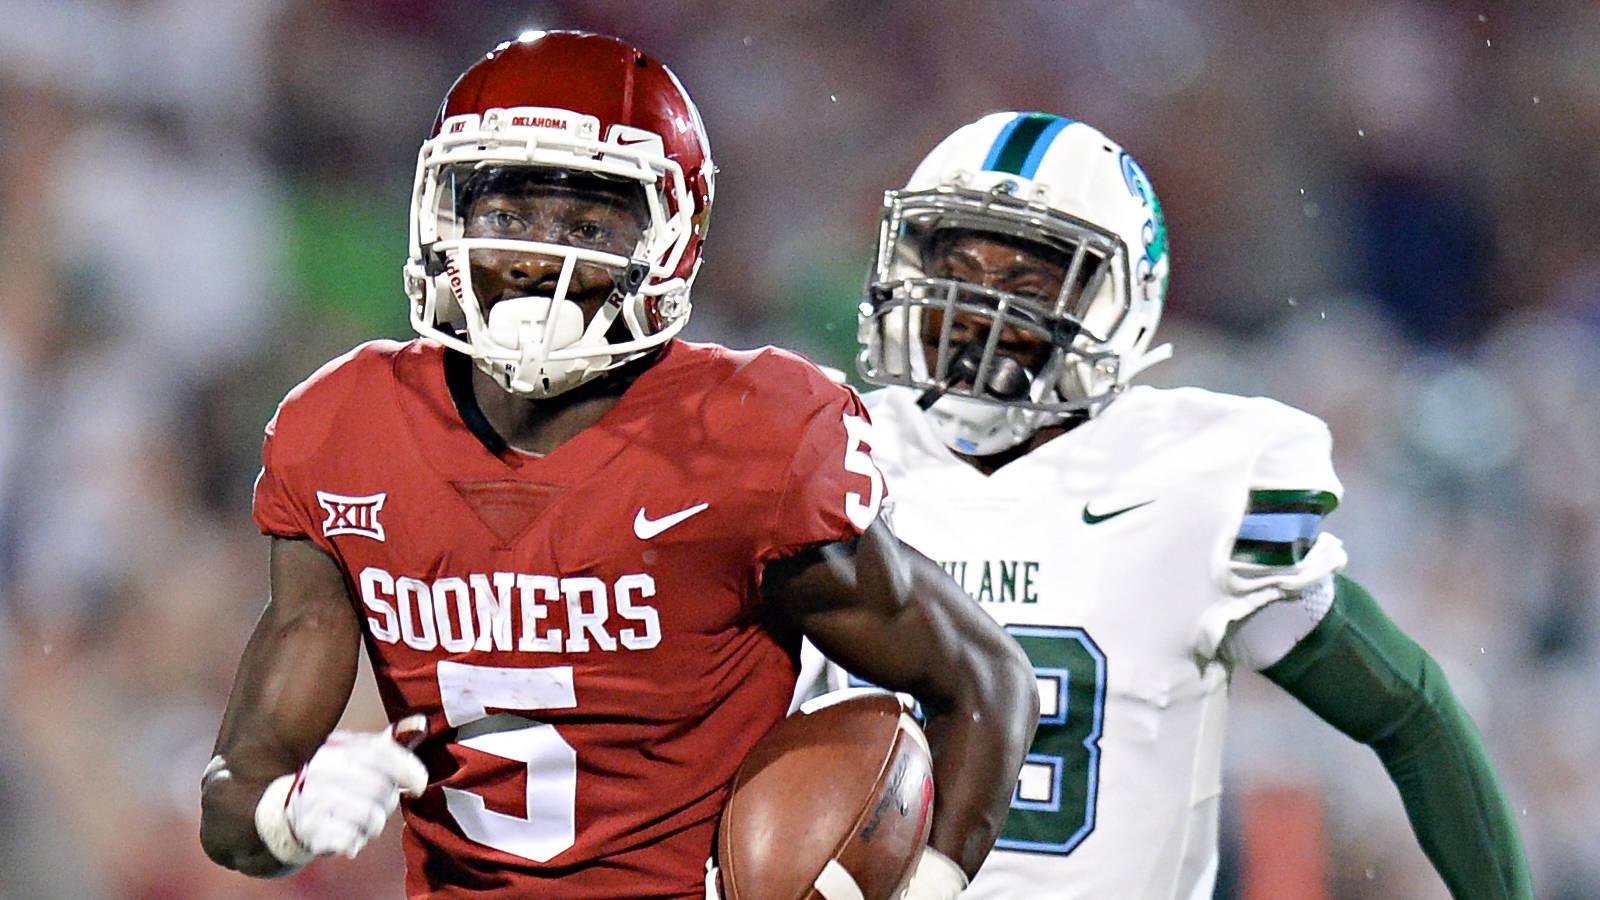 EAGLES DRAFT WR MARQUISE BROWN IN WAY TOO EARLY 2019 MOCK!. Fast